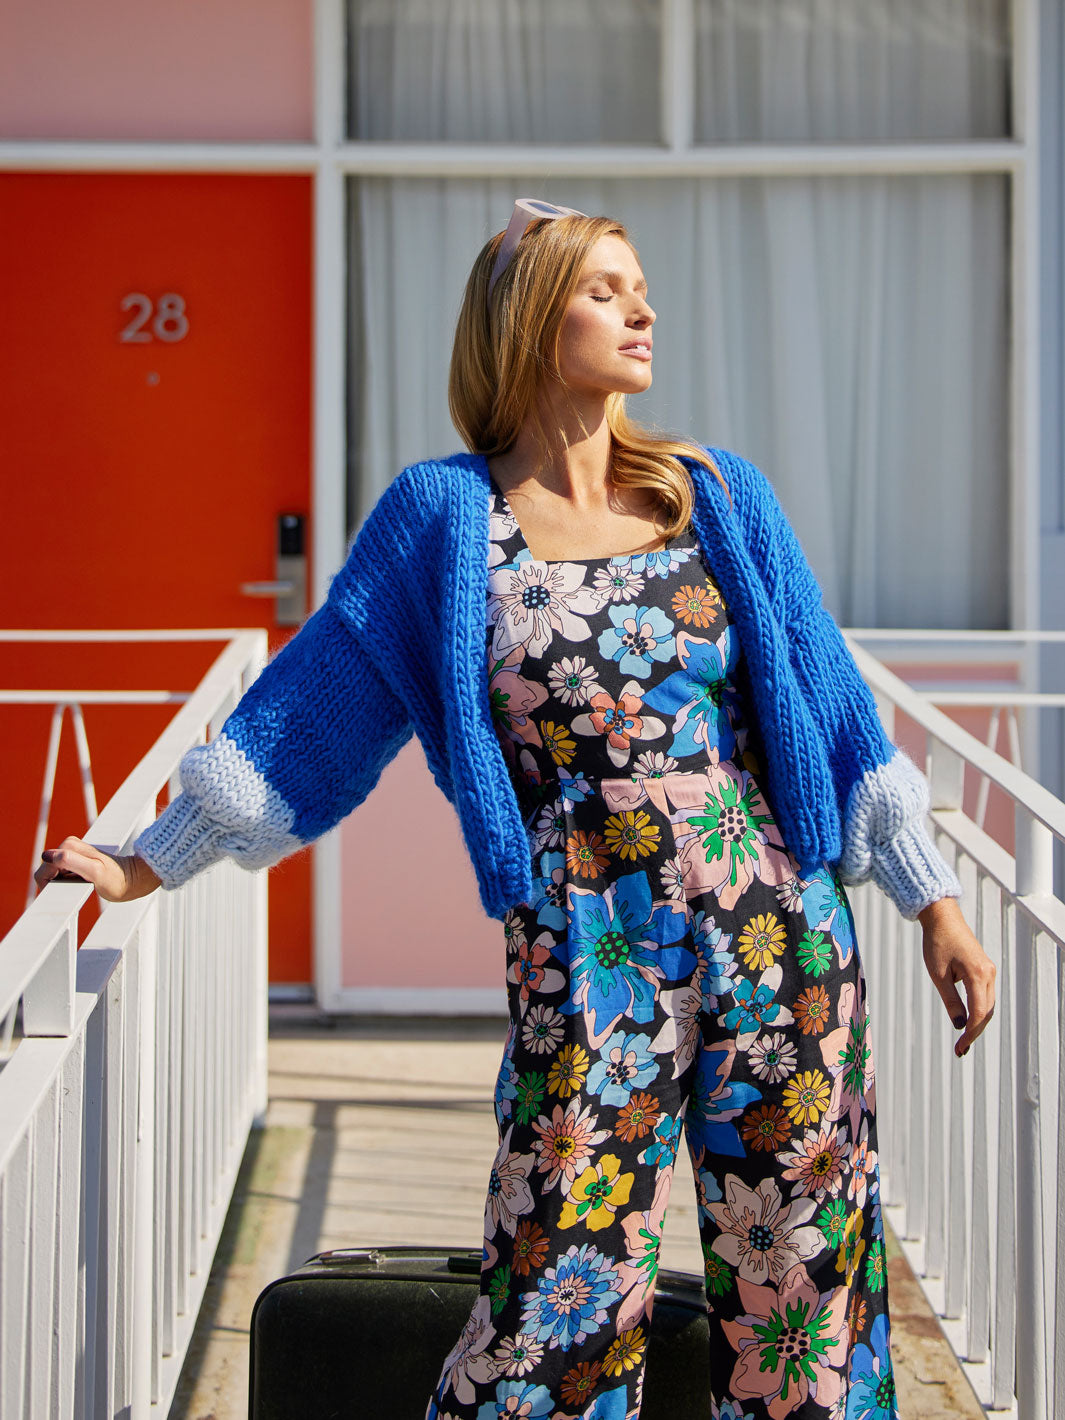 Girls stands in motel wearing floral jumpsuit and blue cardigan